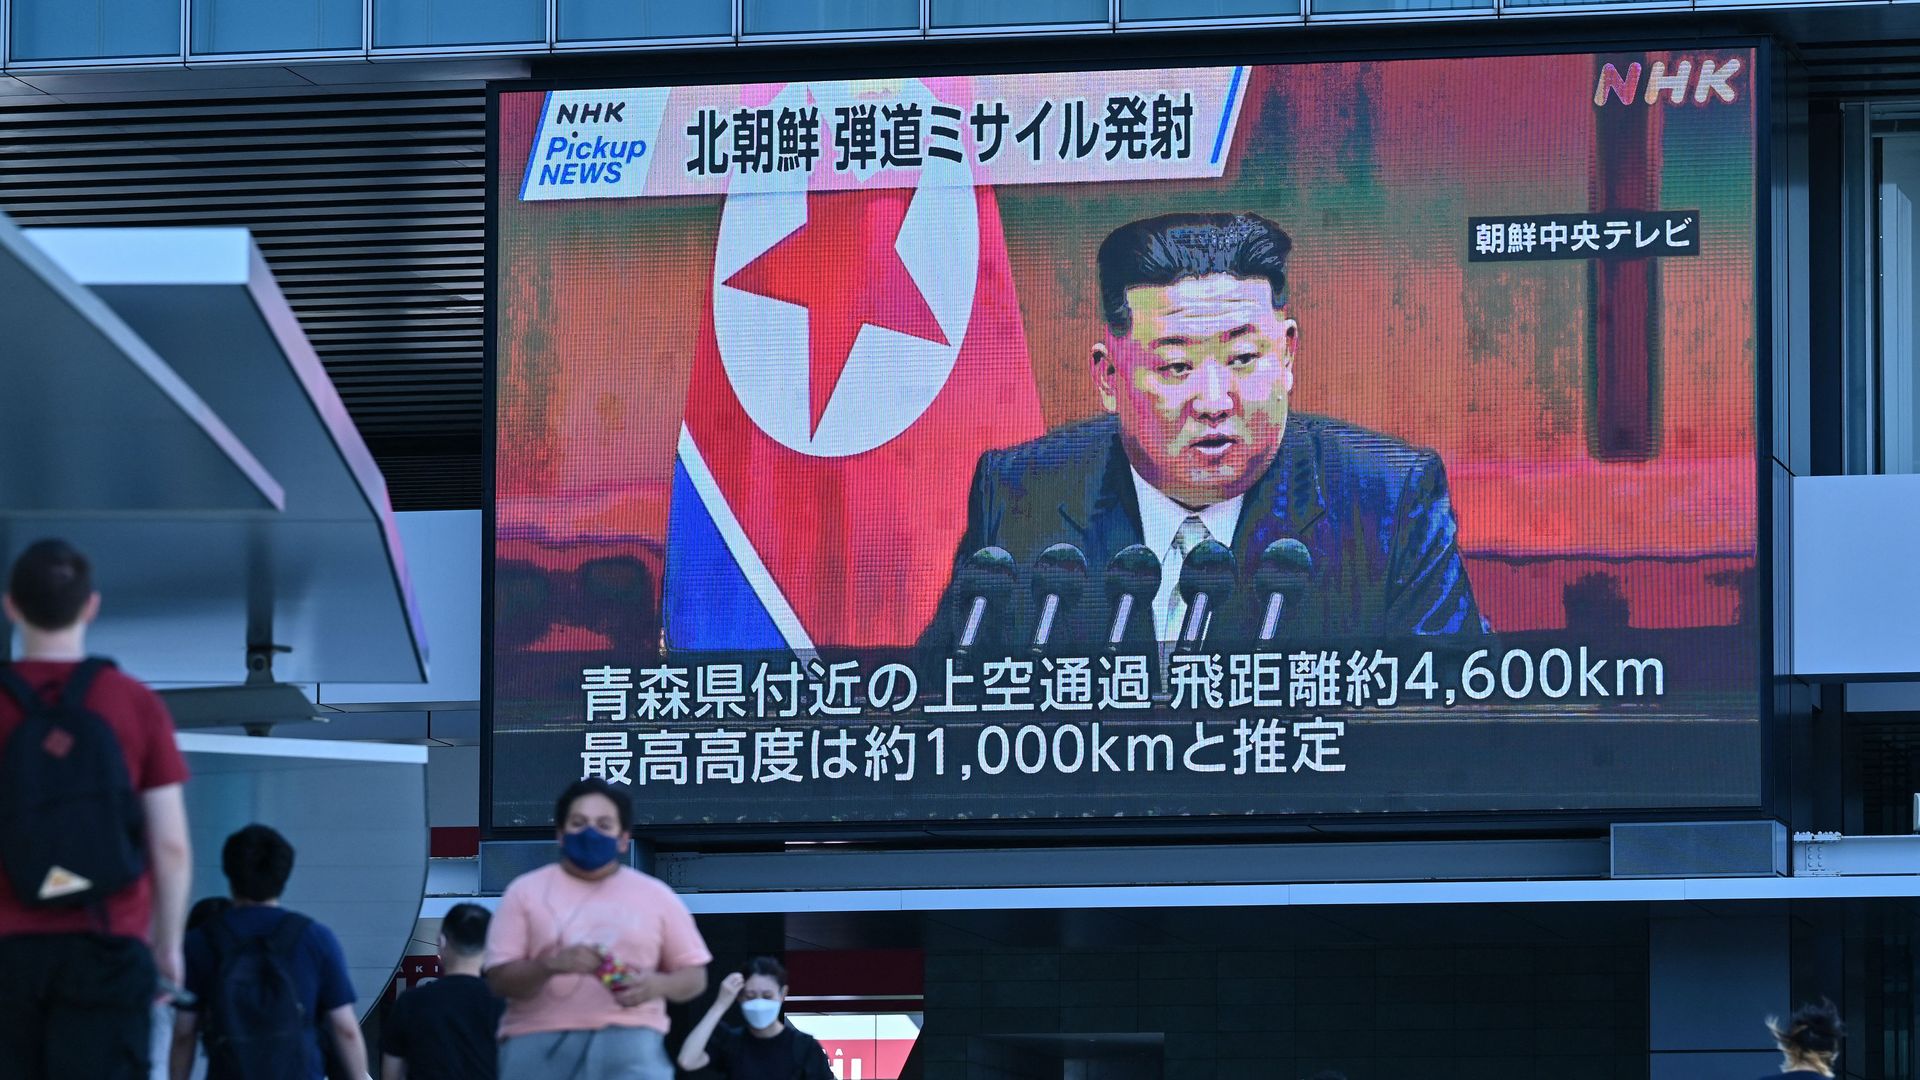 Pedestrians walk under a large video screen showing images of North Korea's leader Kim Jong Un during a news update in Tokyo on October 4, 2022